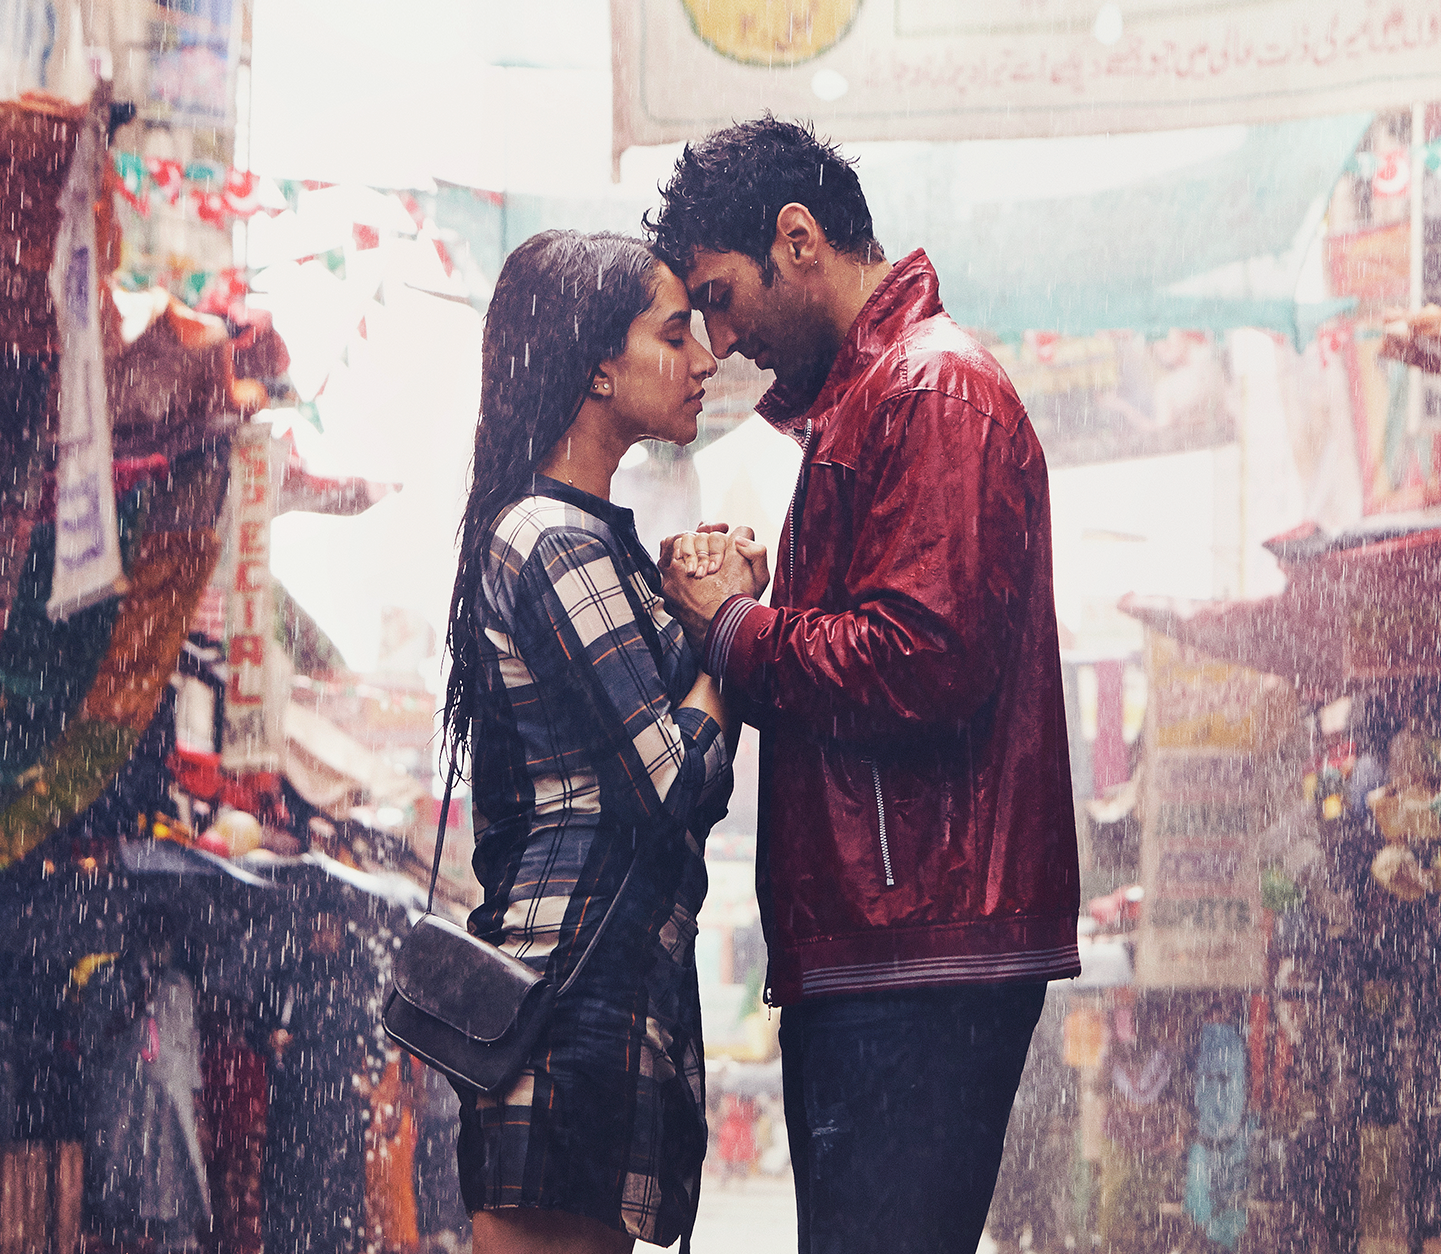 Shraddha Kapoor: “What I love about my character in OK Jaanu is ...